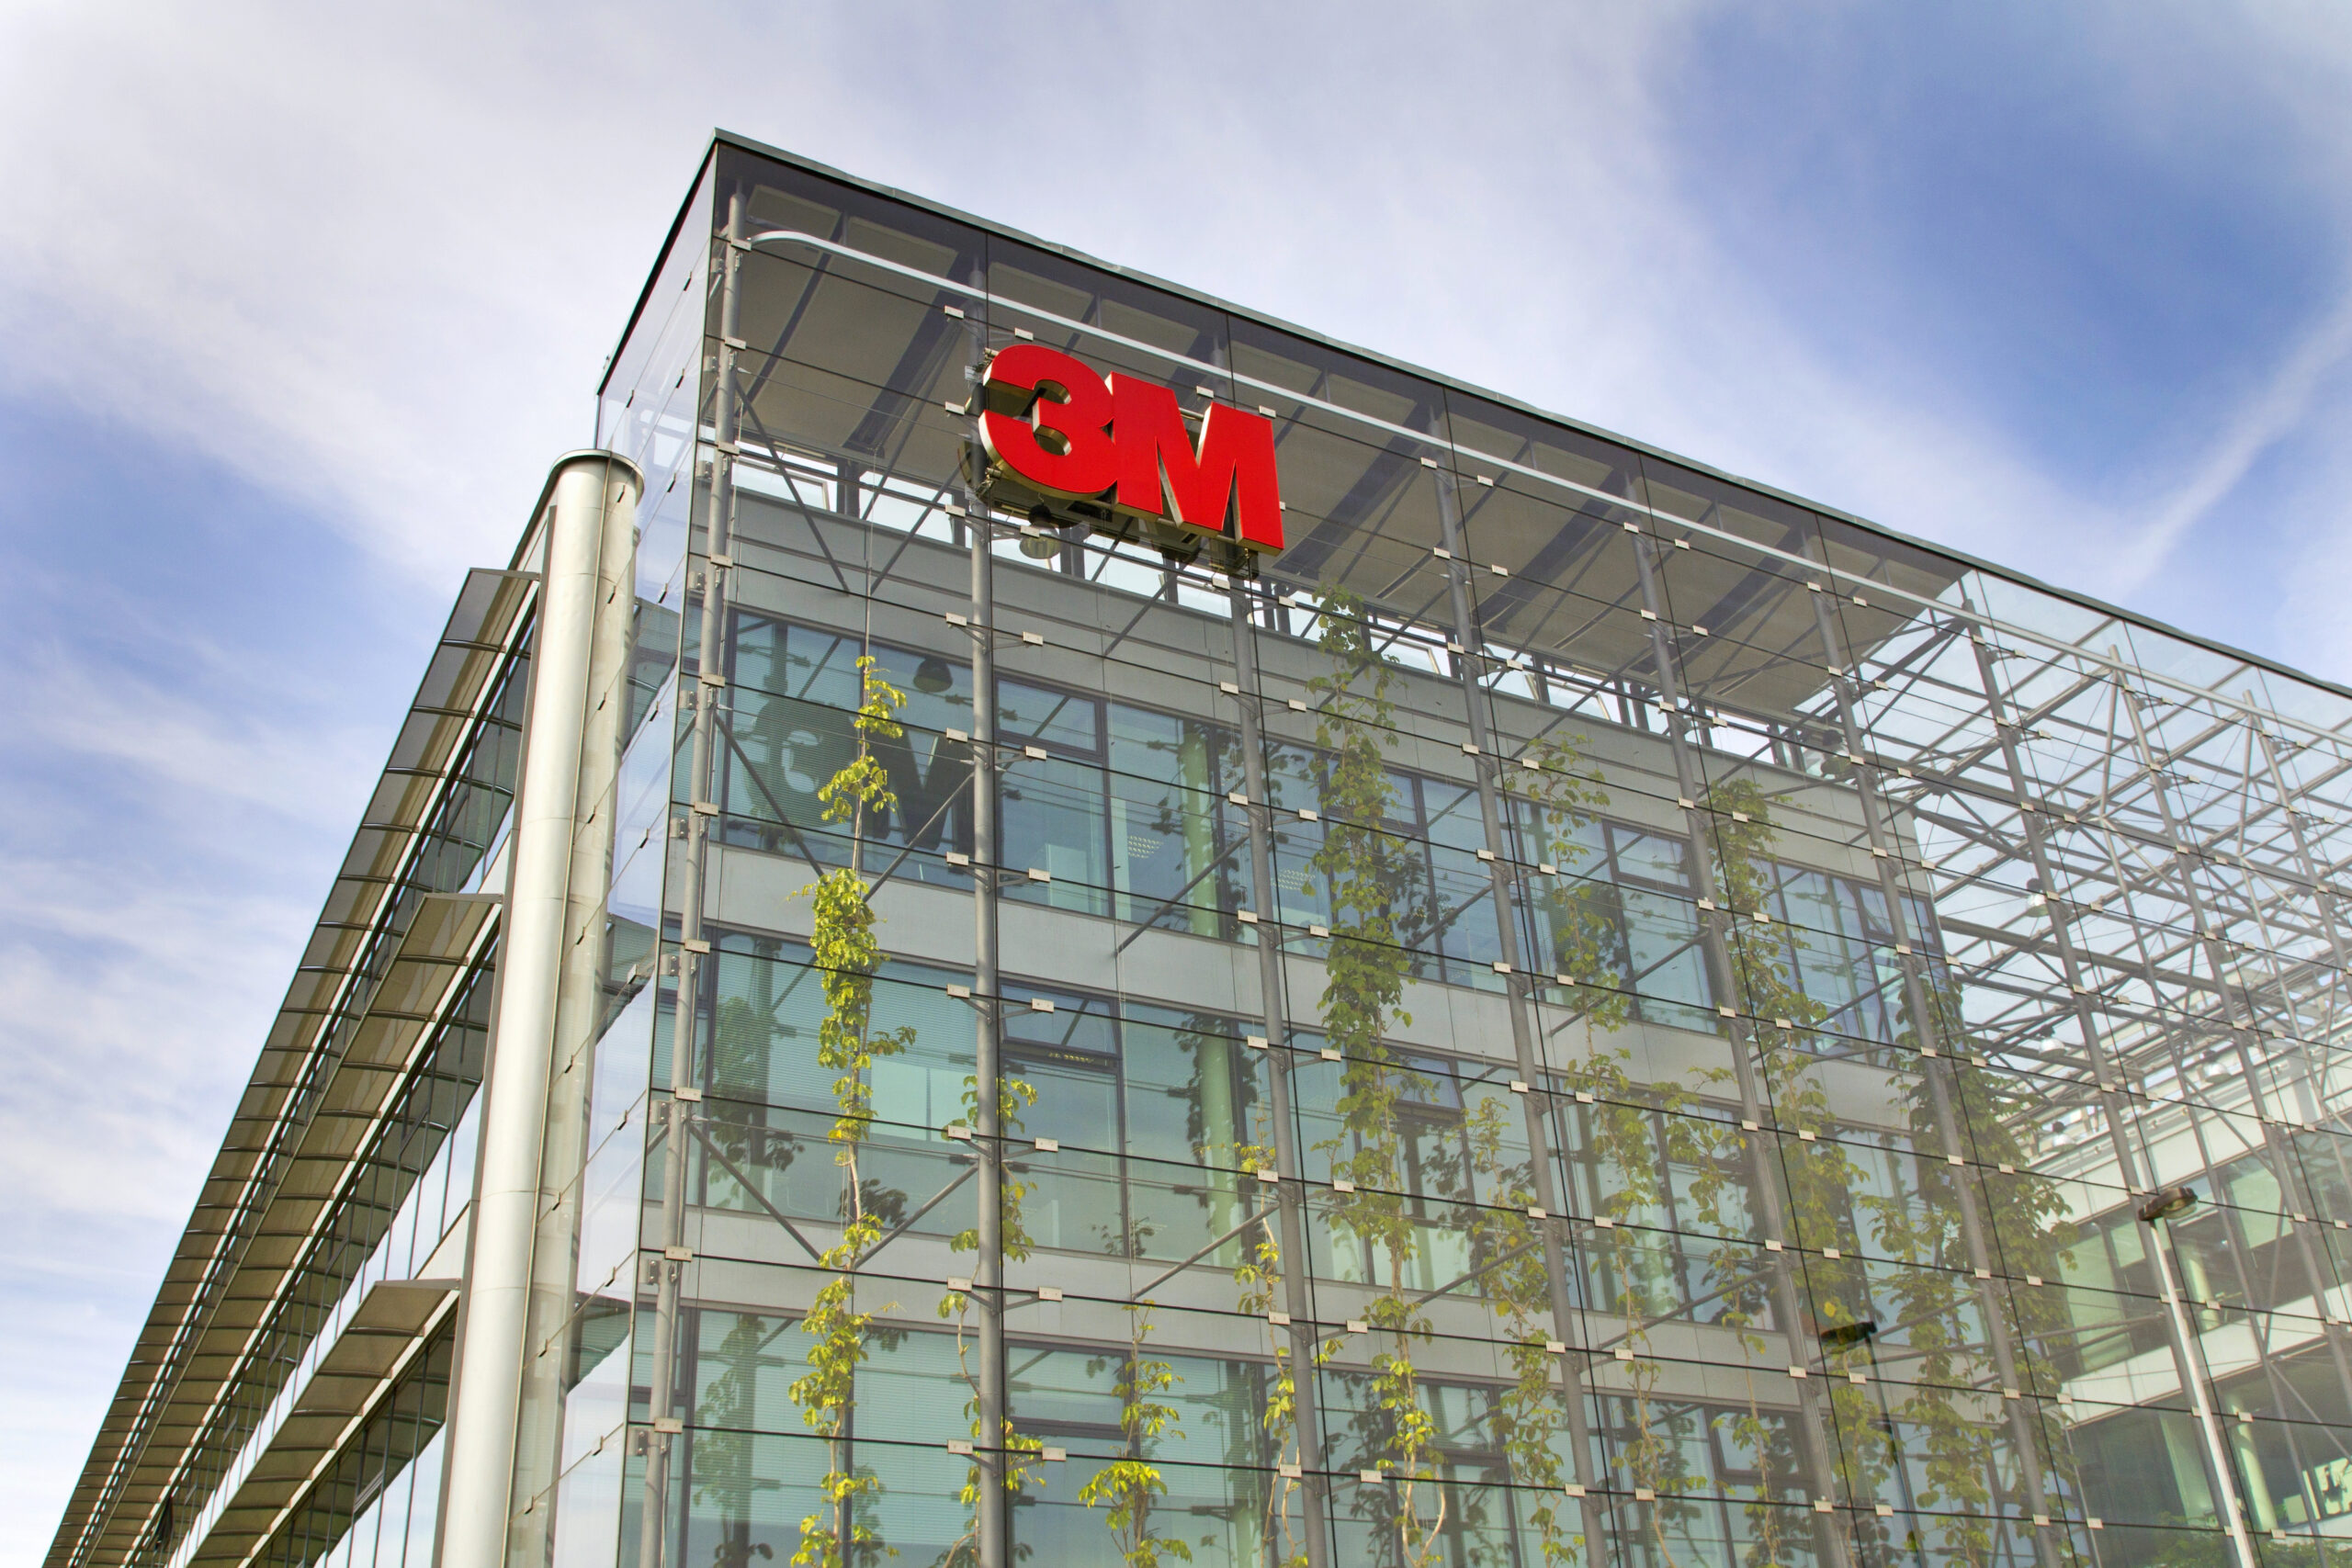 3M forever chemicals settlement advances, but some AGs unhappy with payout [Video]